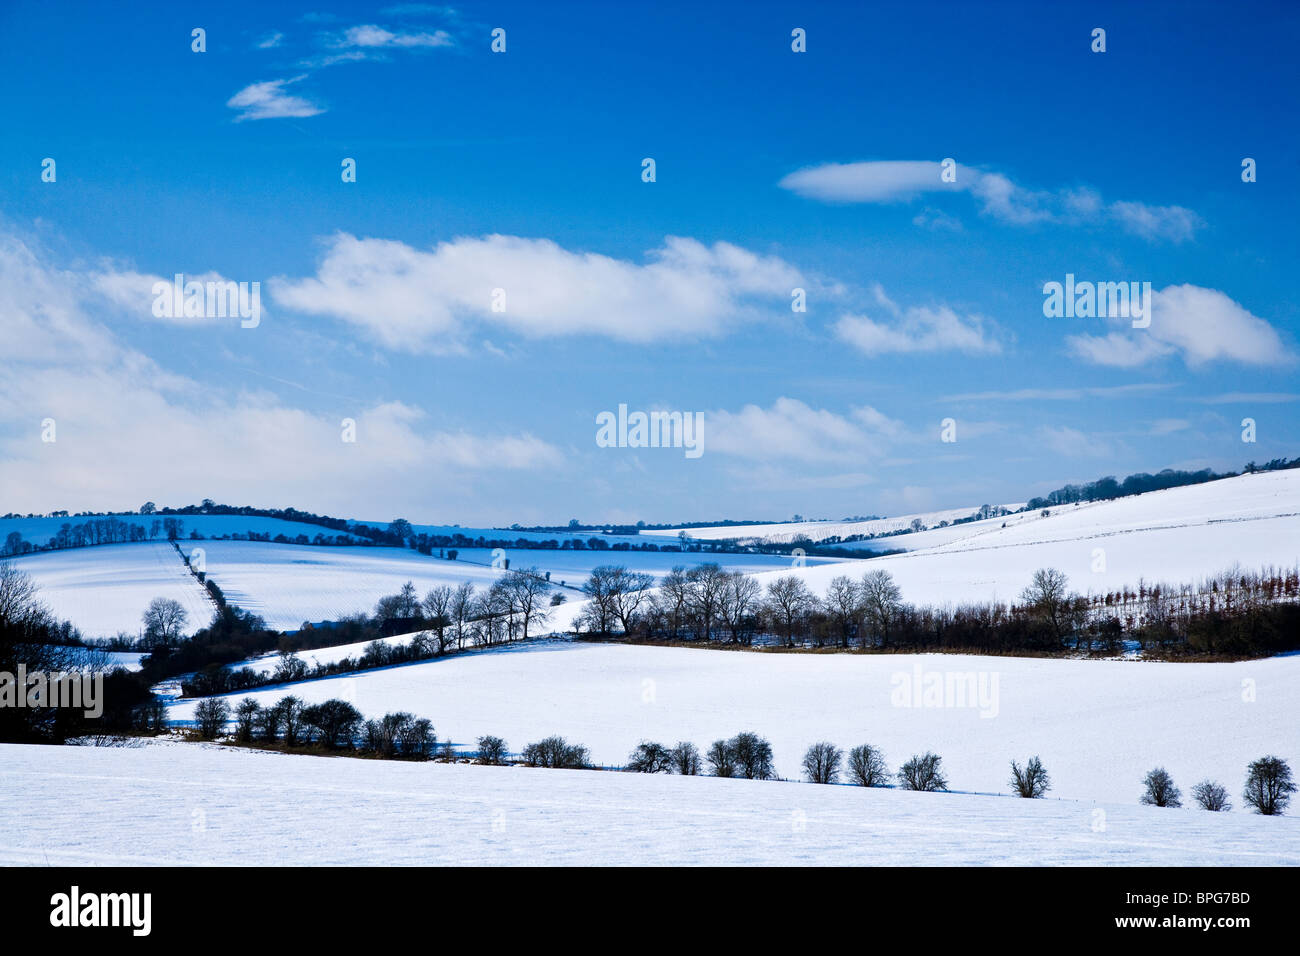 A sunny,snowy,winter landscape view or scene on the Downs in Wiltshire, England, UK Stock Photo